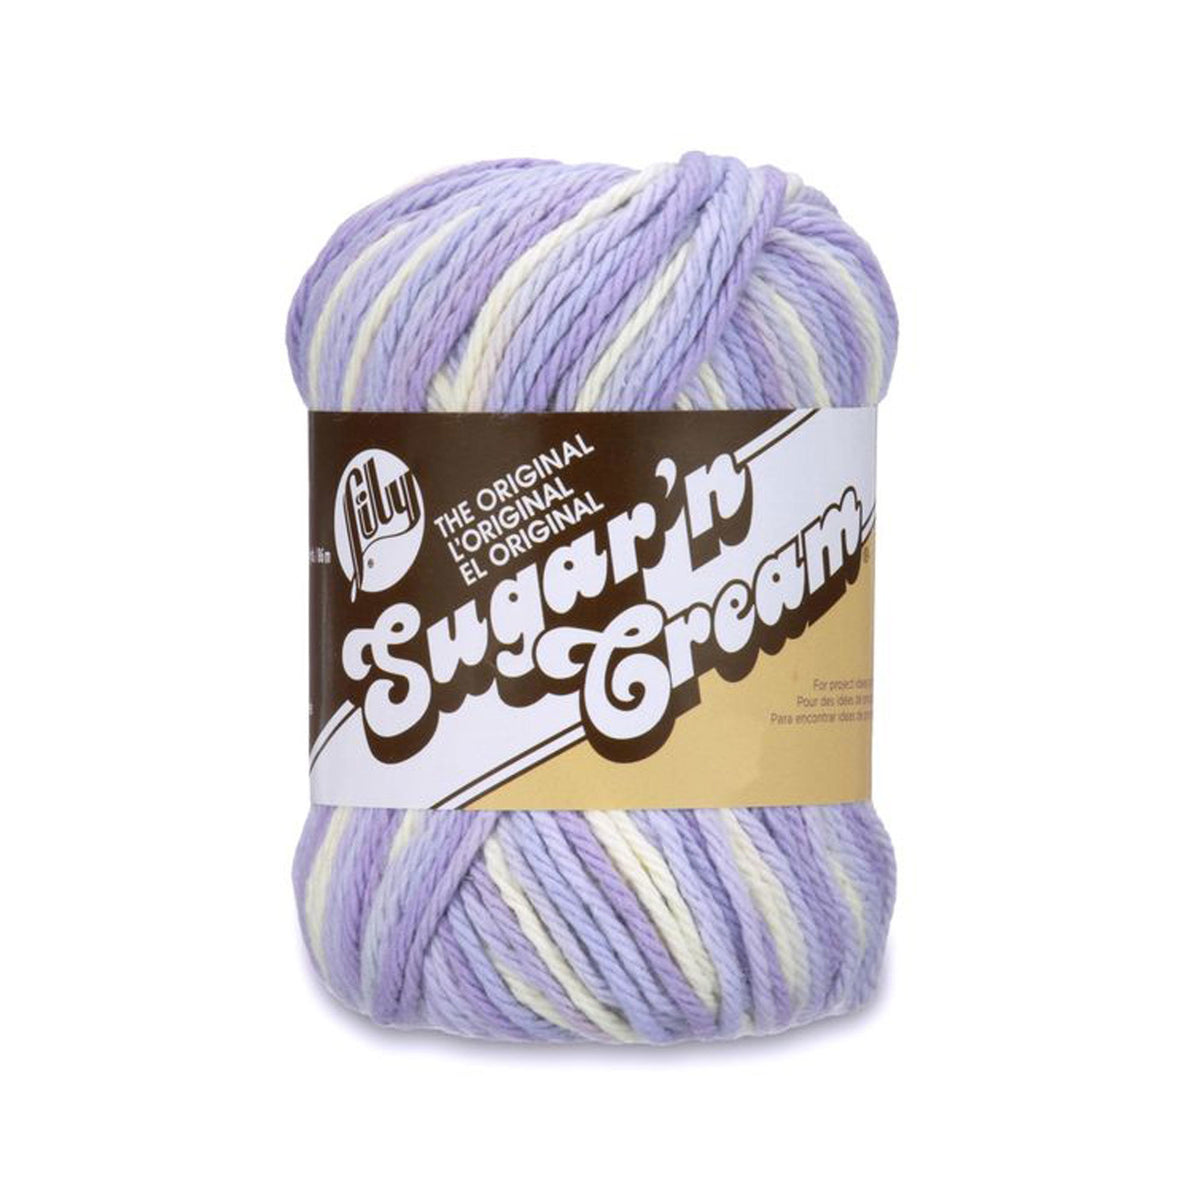 Lily Sugar 'n Cream Ombre - Knitty City